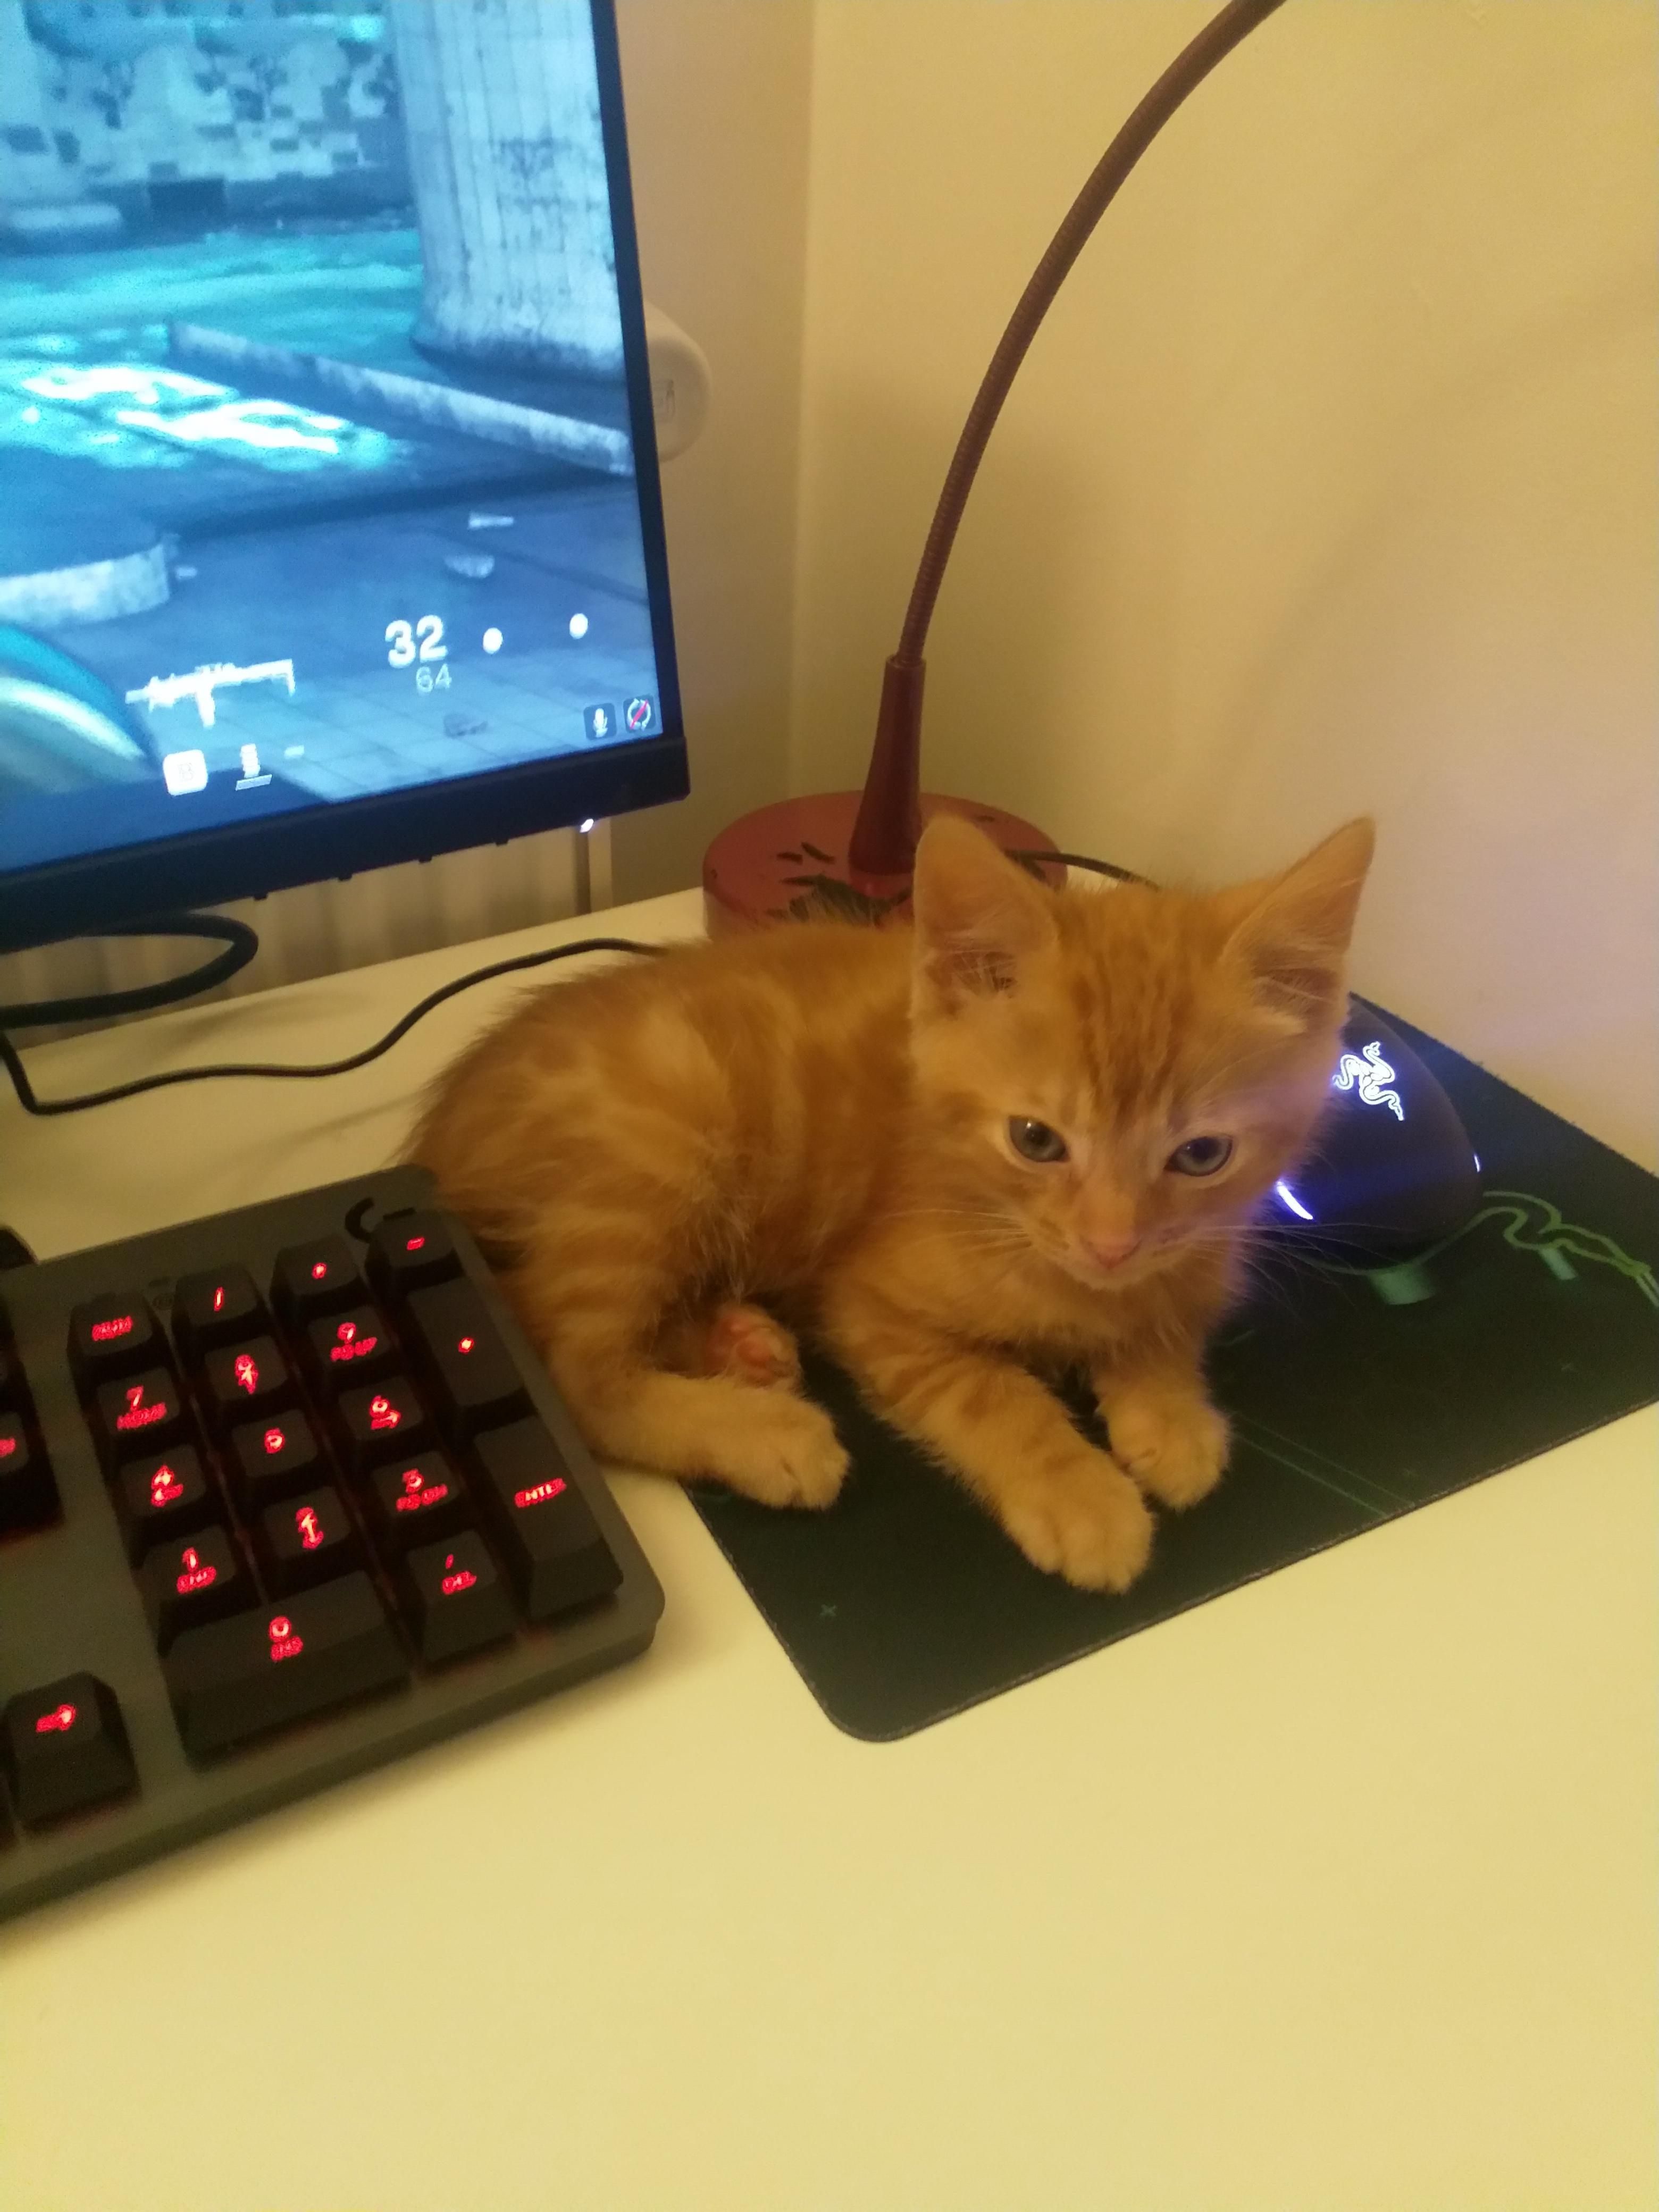 My new kitten made me realize I need to buy a bigger mouse mat...